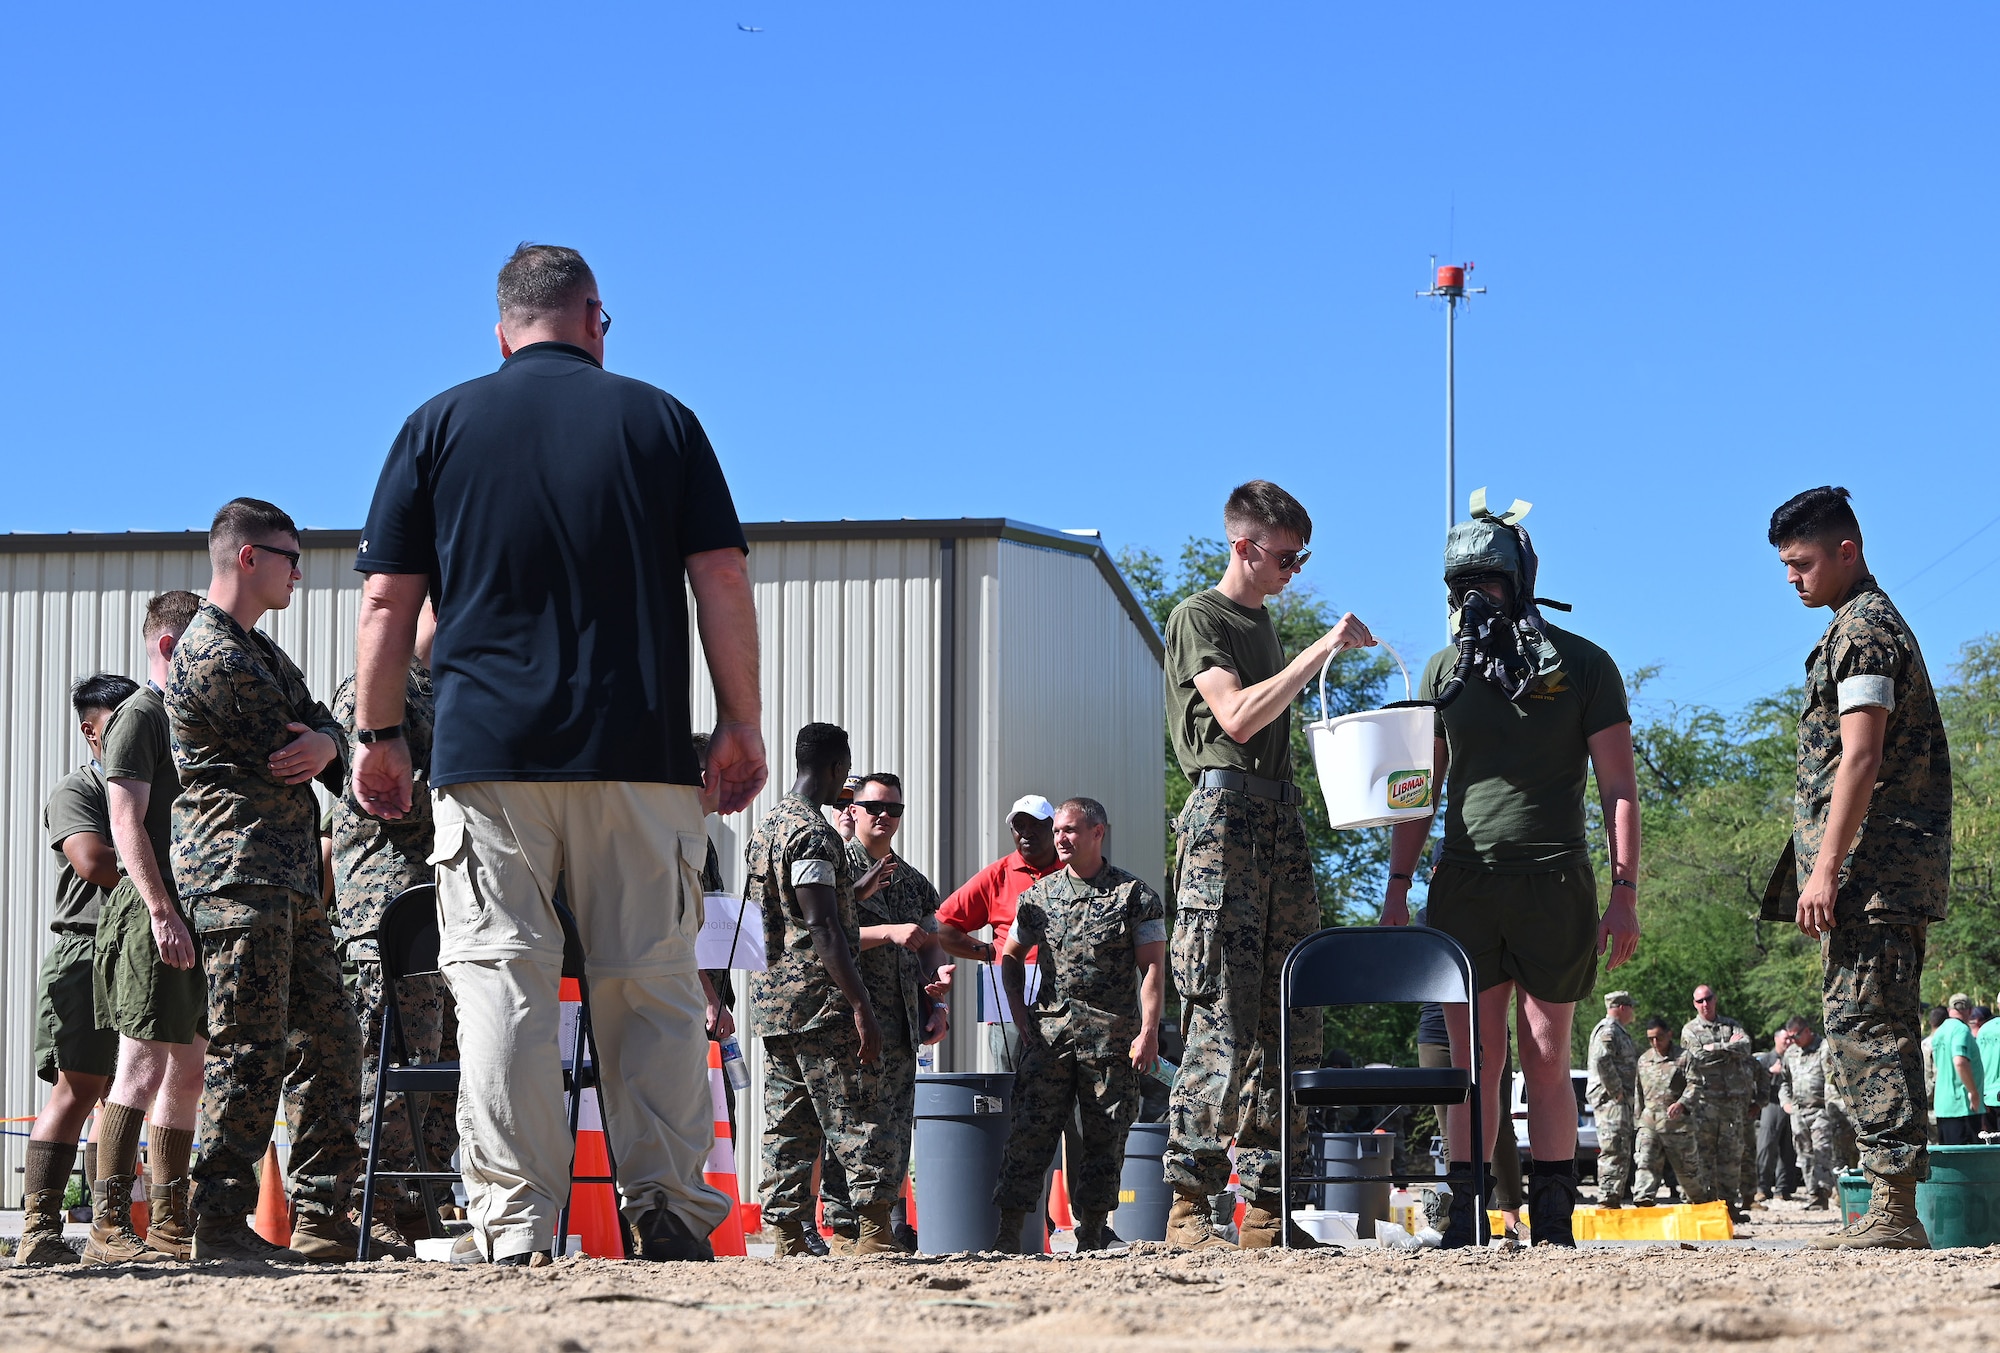 Toxic Pineapple II arms Joint Force AFE teams CBRN defense training